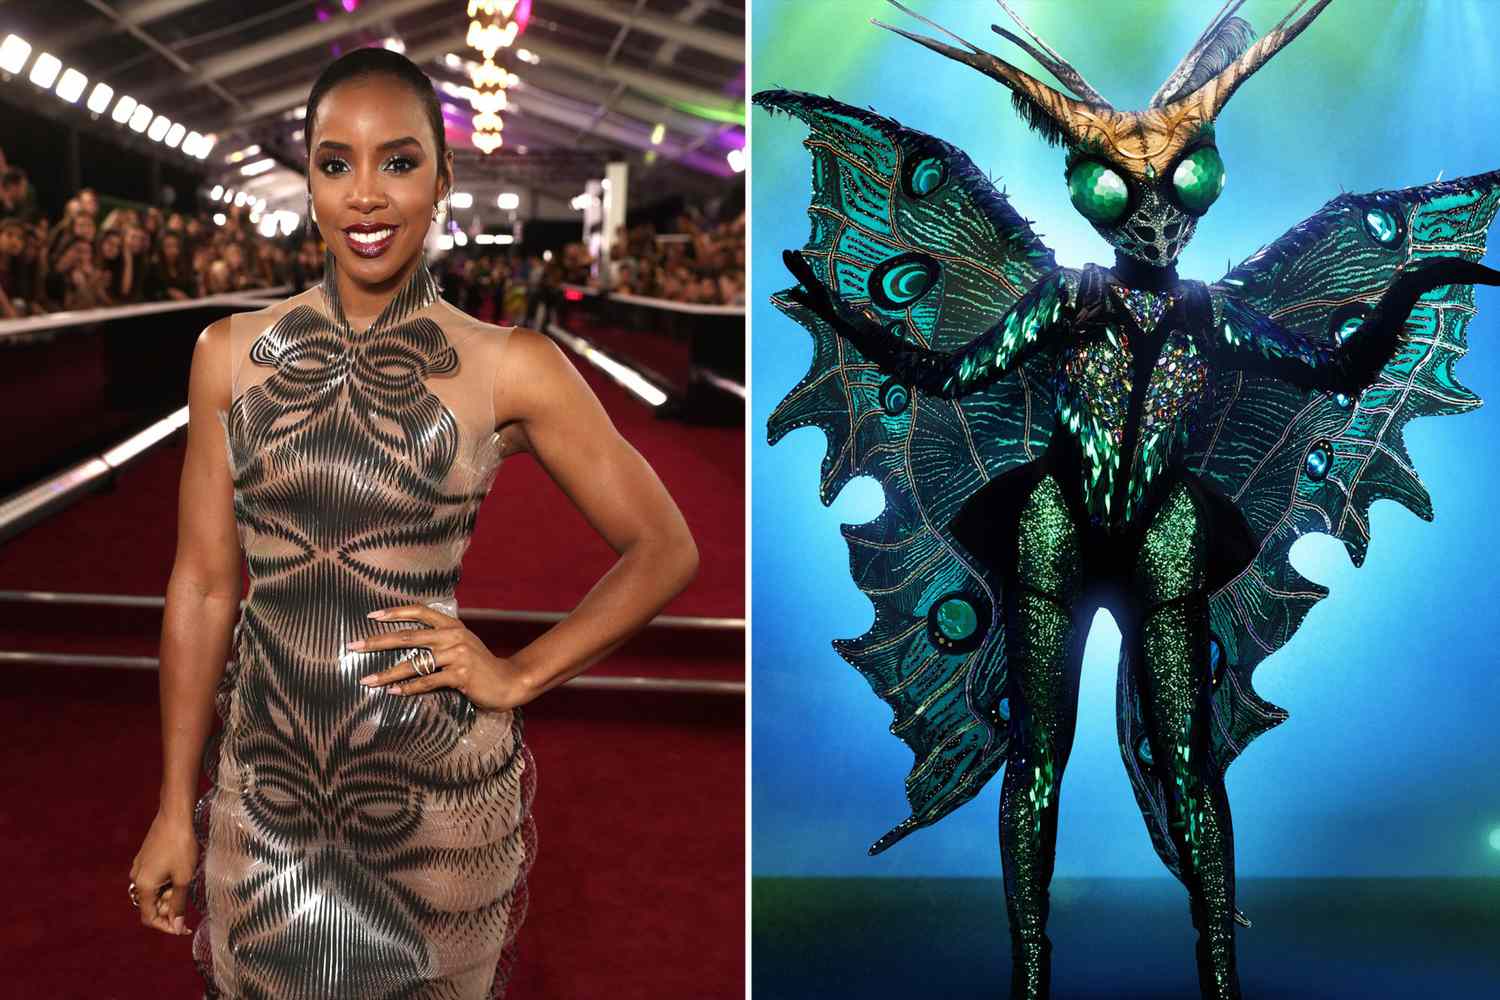 Kelly Rowland and Butterfly masked singer